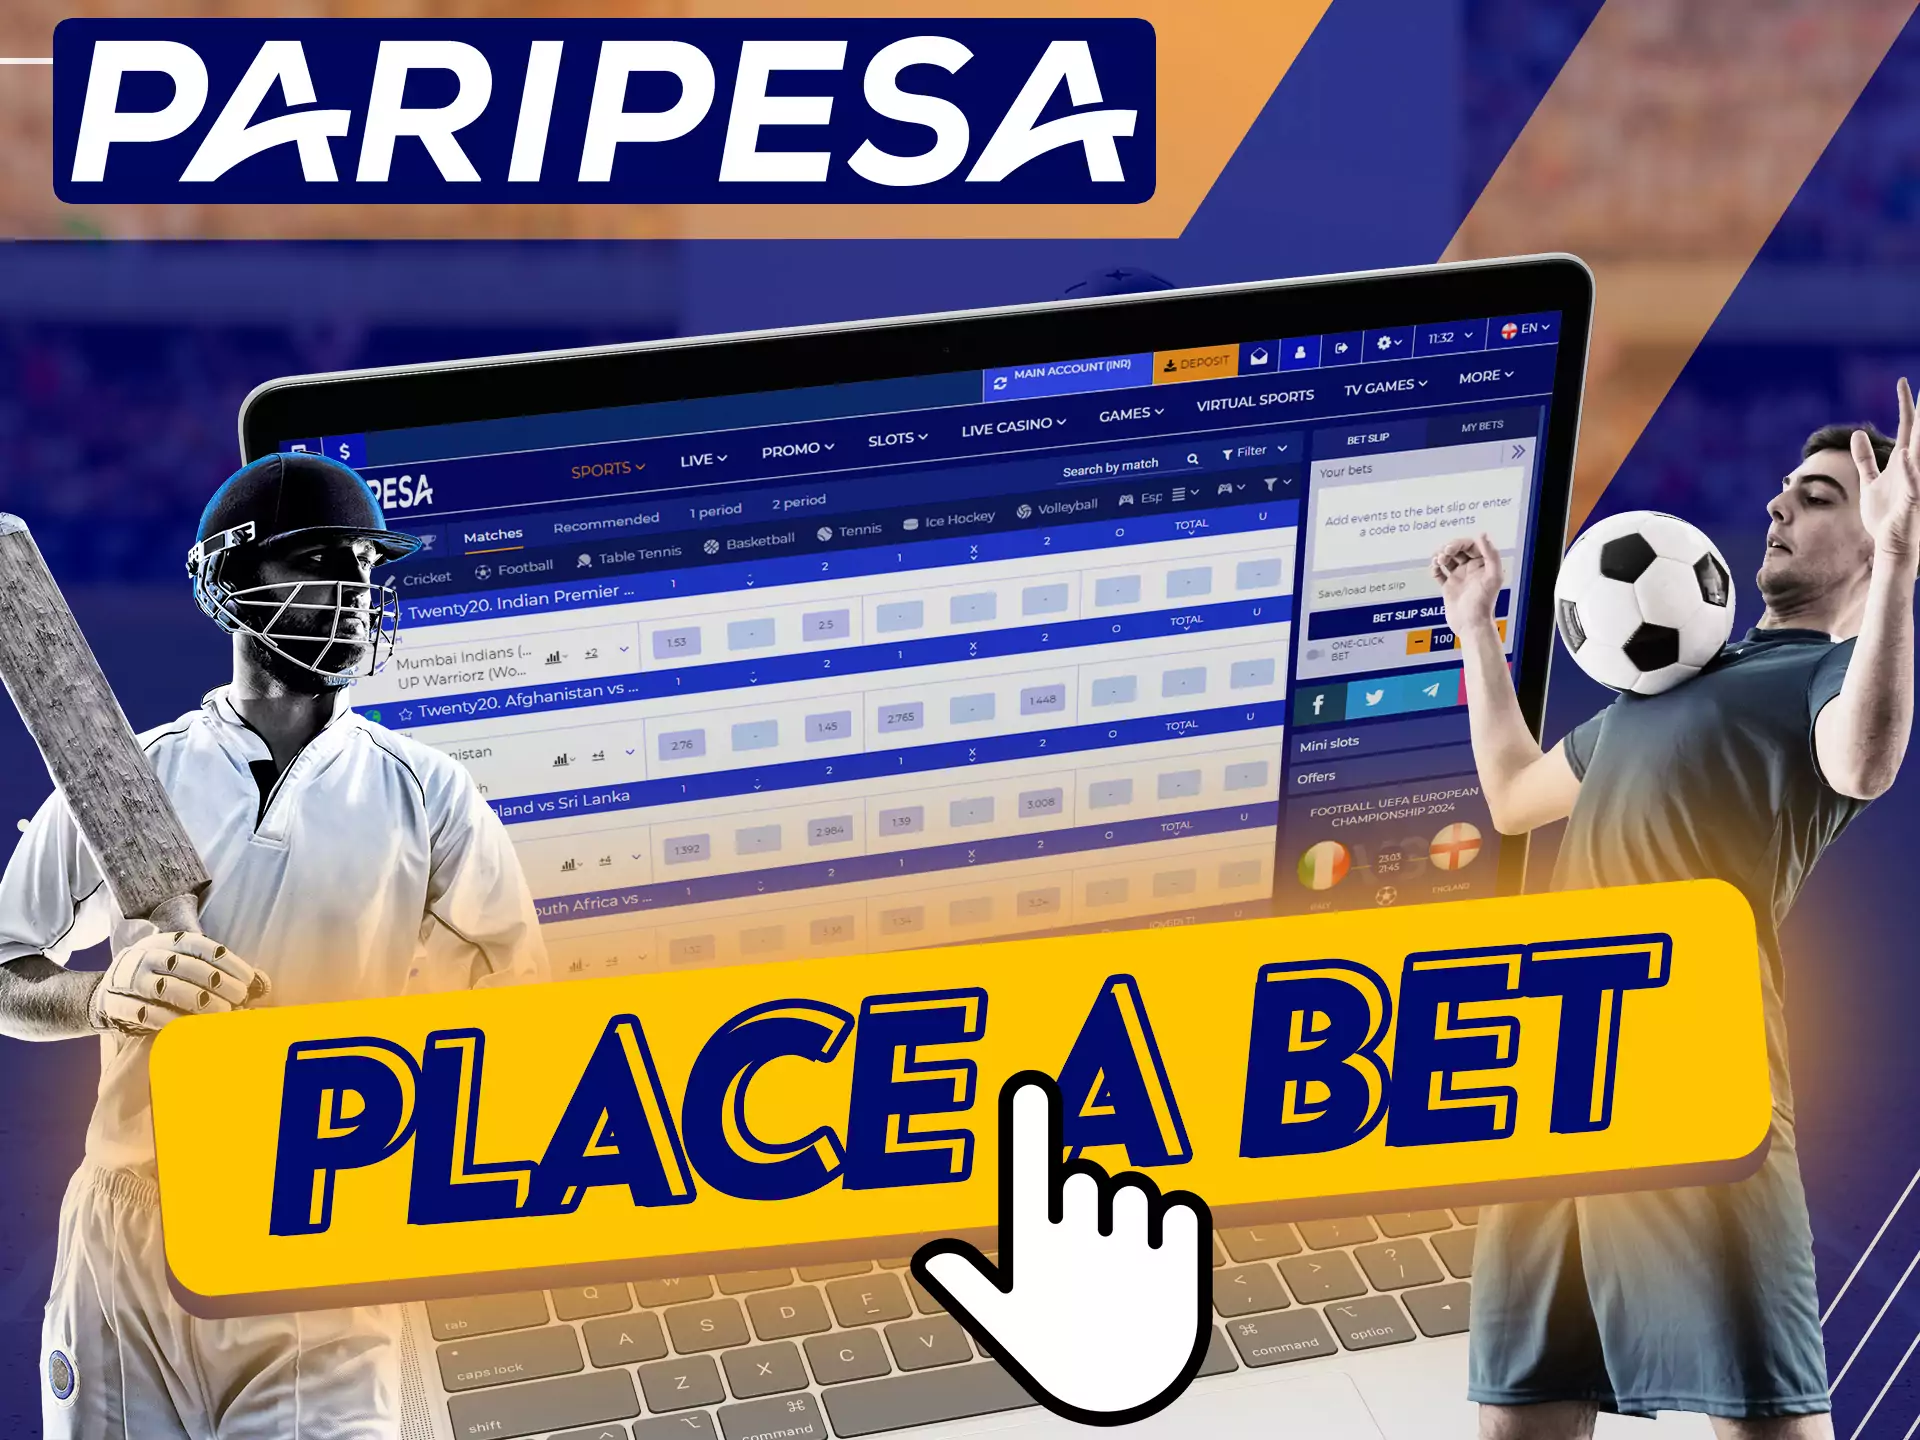 With these instructions, it's easy to start betting on Paripesa sports.